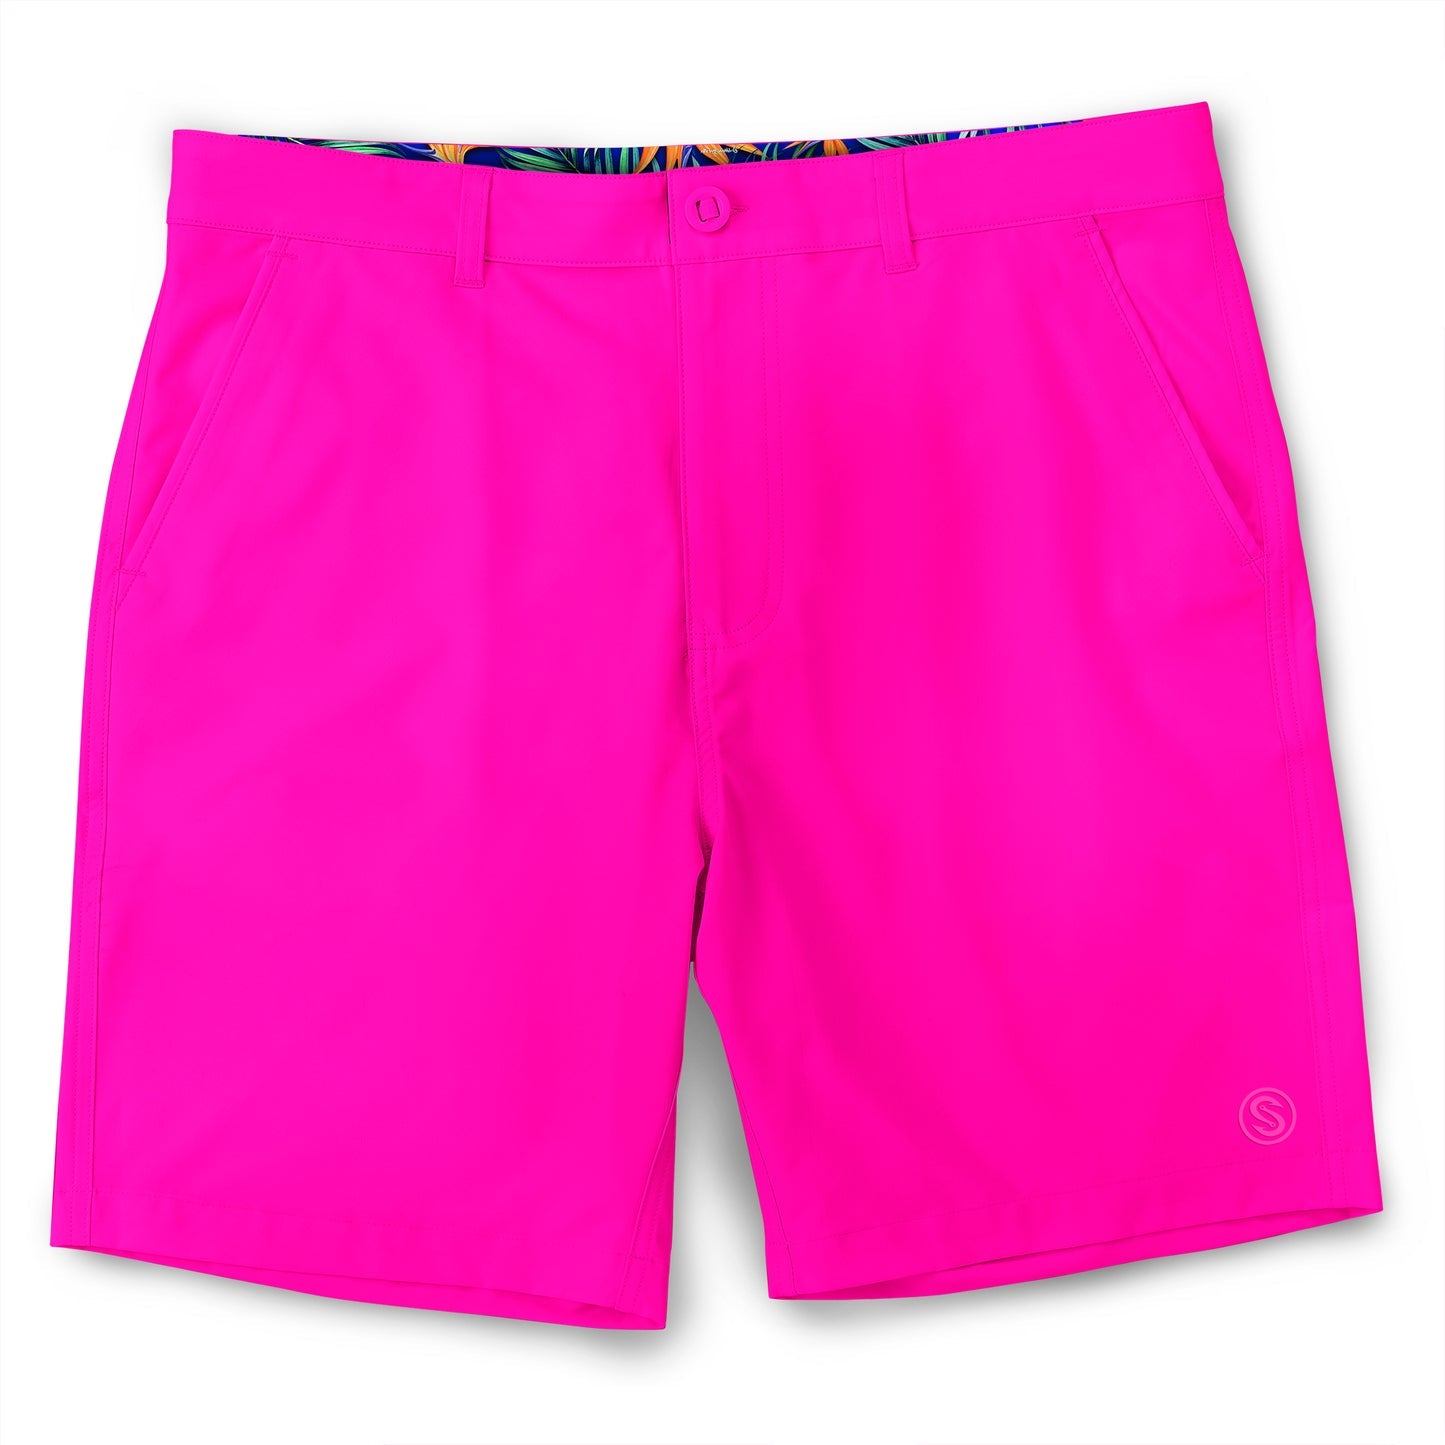 SCALES All Tides Walkshorts